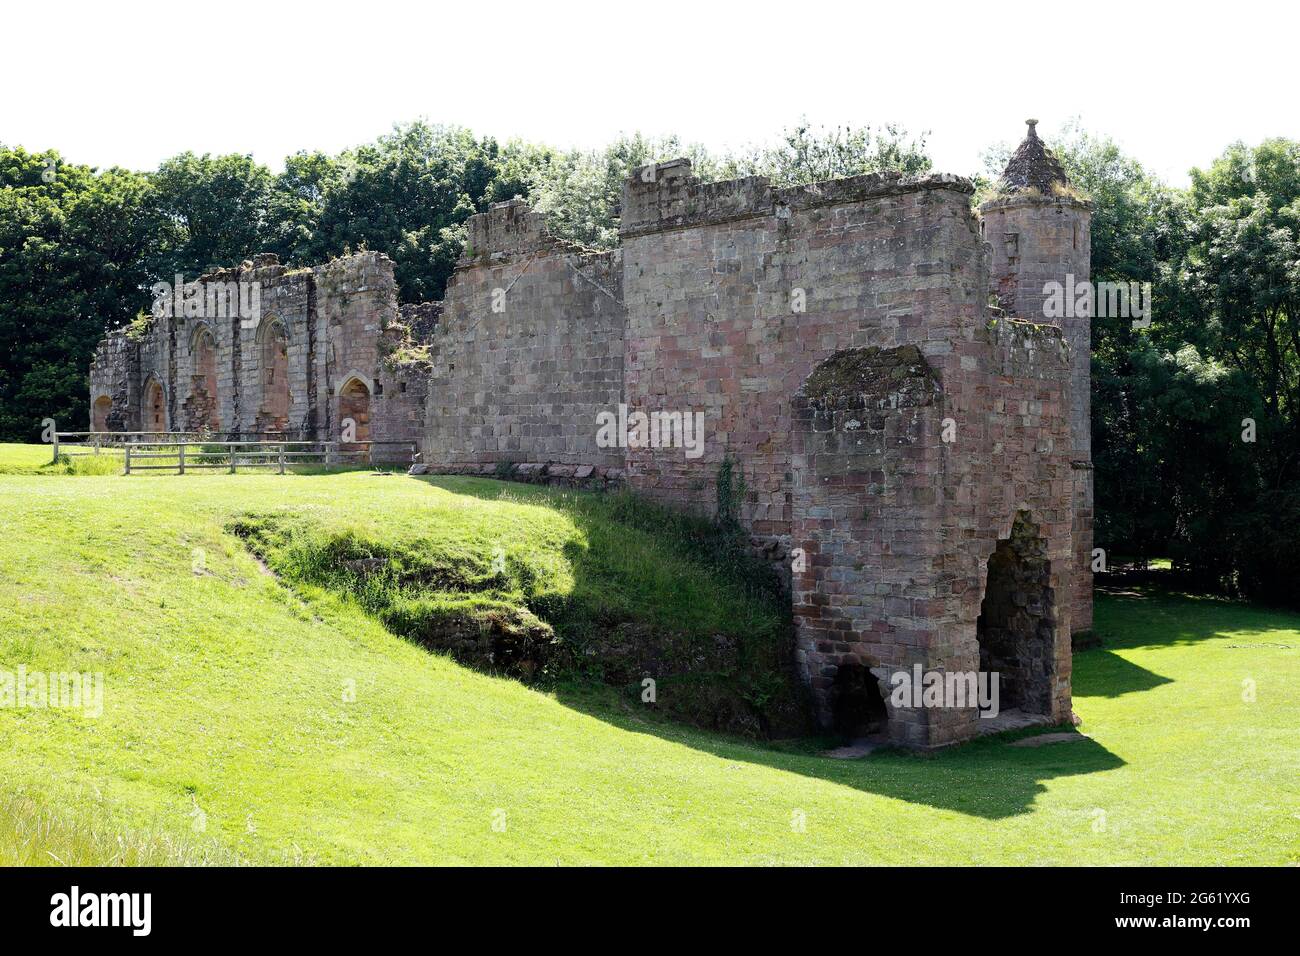 Spofforth Castle, Near harrogate. North Yorkshire, UK  A manor house built around 1224. The Magna Carter was reputed to be drawn up in Spofforth 1215 Stock Photo